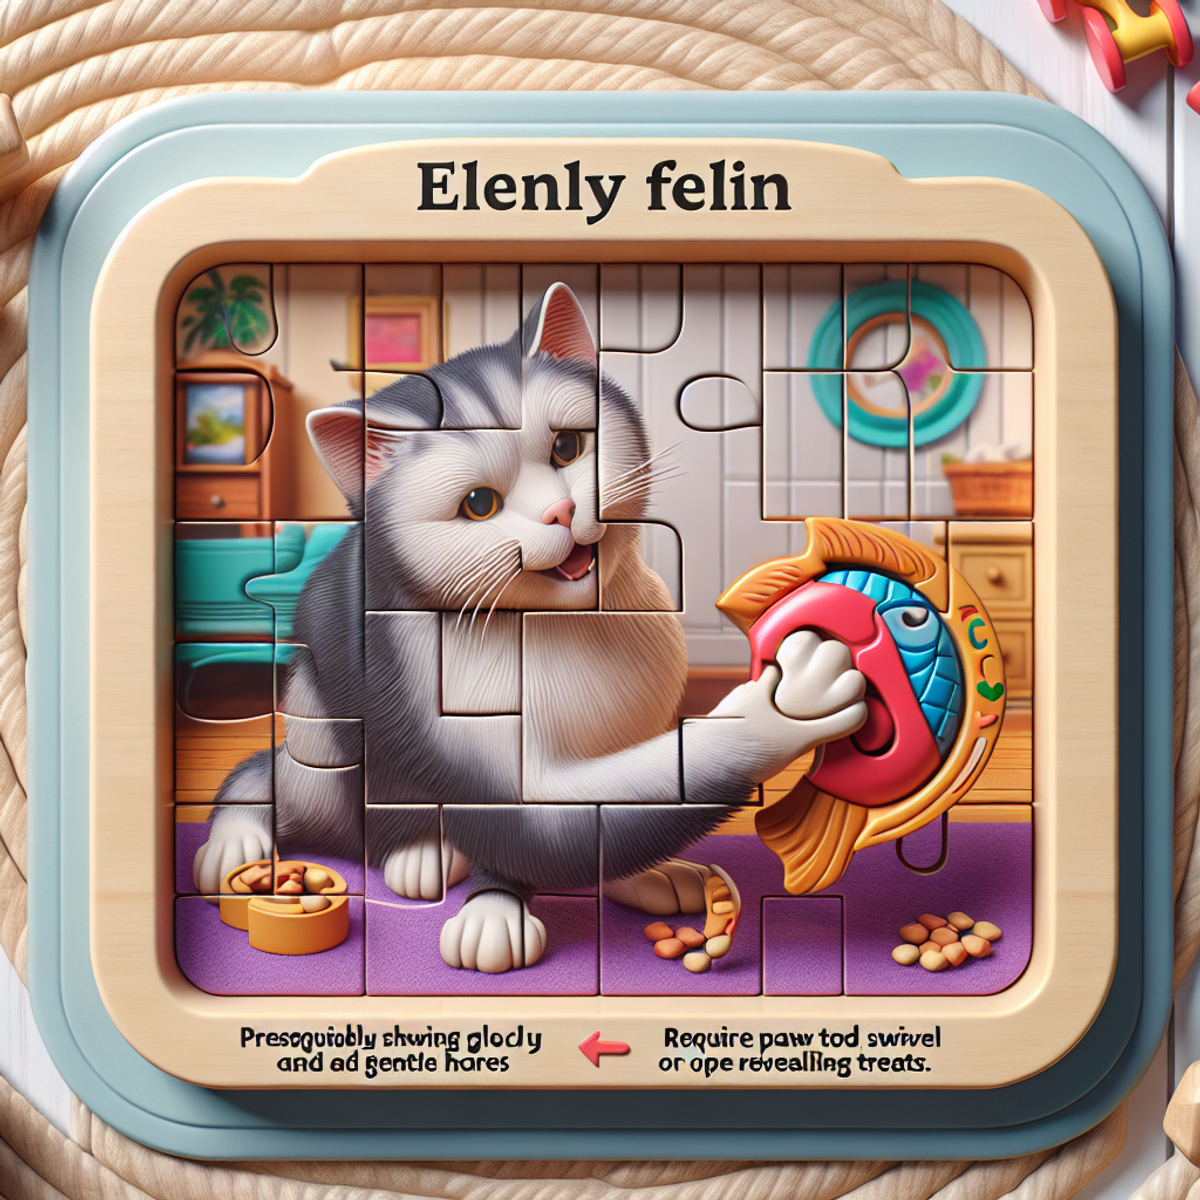 An elderly cat with grey fur playing with a fish-shaped puzzle toy in a cozy home environment.